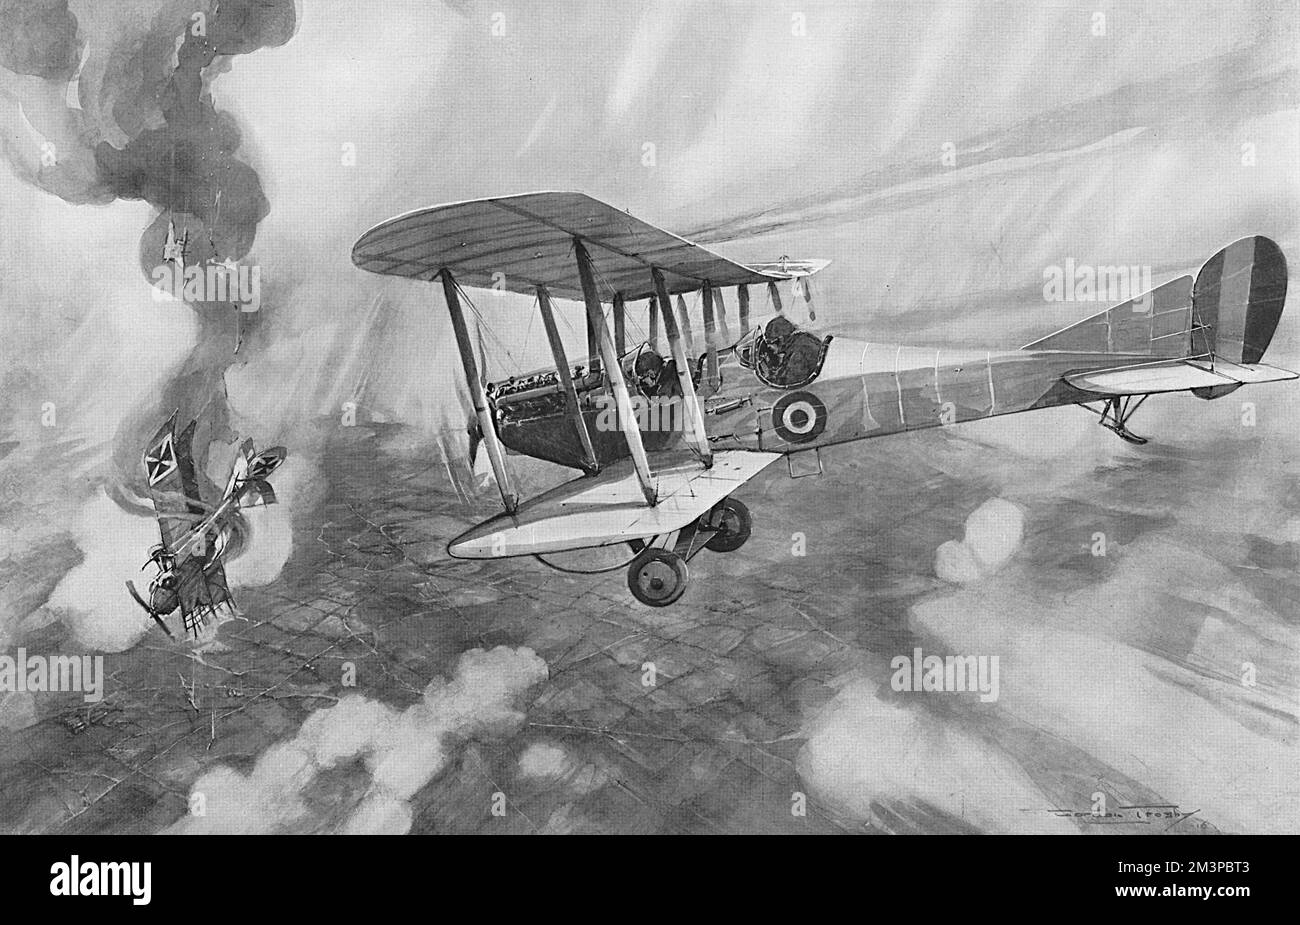 A British scouting biplane, attacked by machine gun fire from a larger German aeroplane over Belgian territory, witnesses the enemy plane spiral to earth in flames after being hit by anti-aircraft guns.    1916 Stock Photo